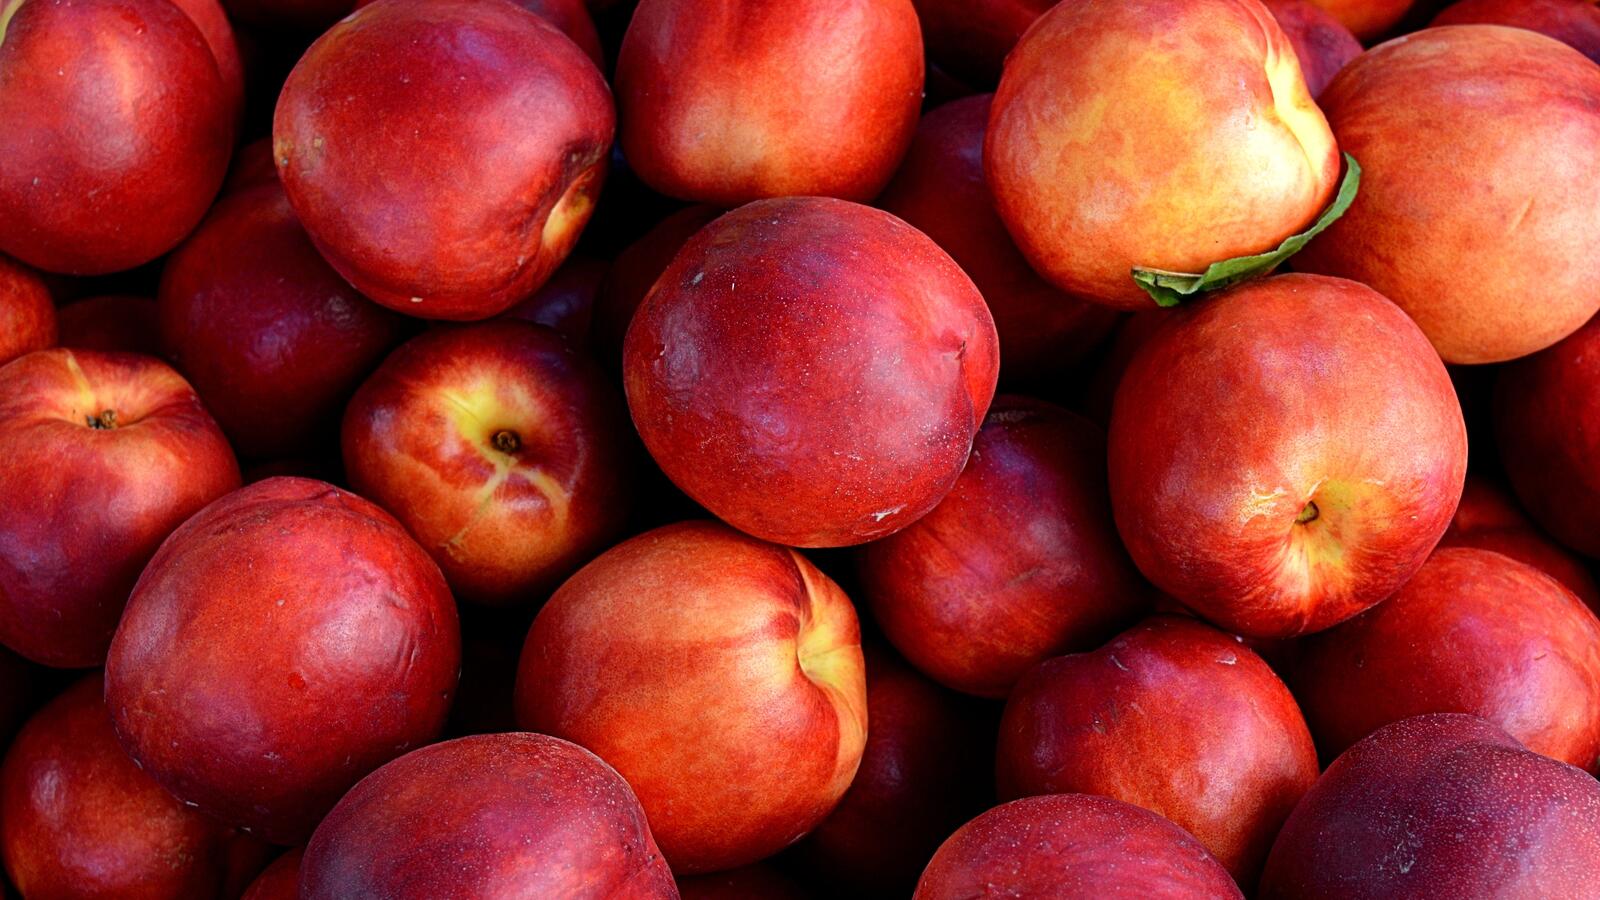 Wallpapers wallpaper peaches ripe red on the desktop